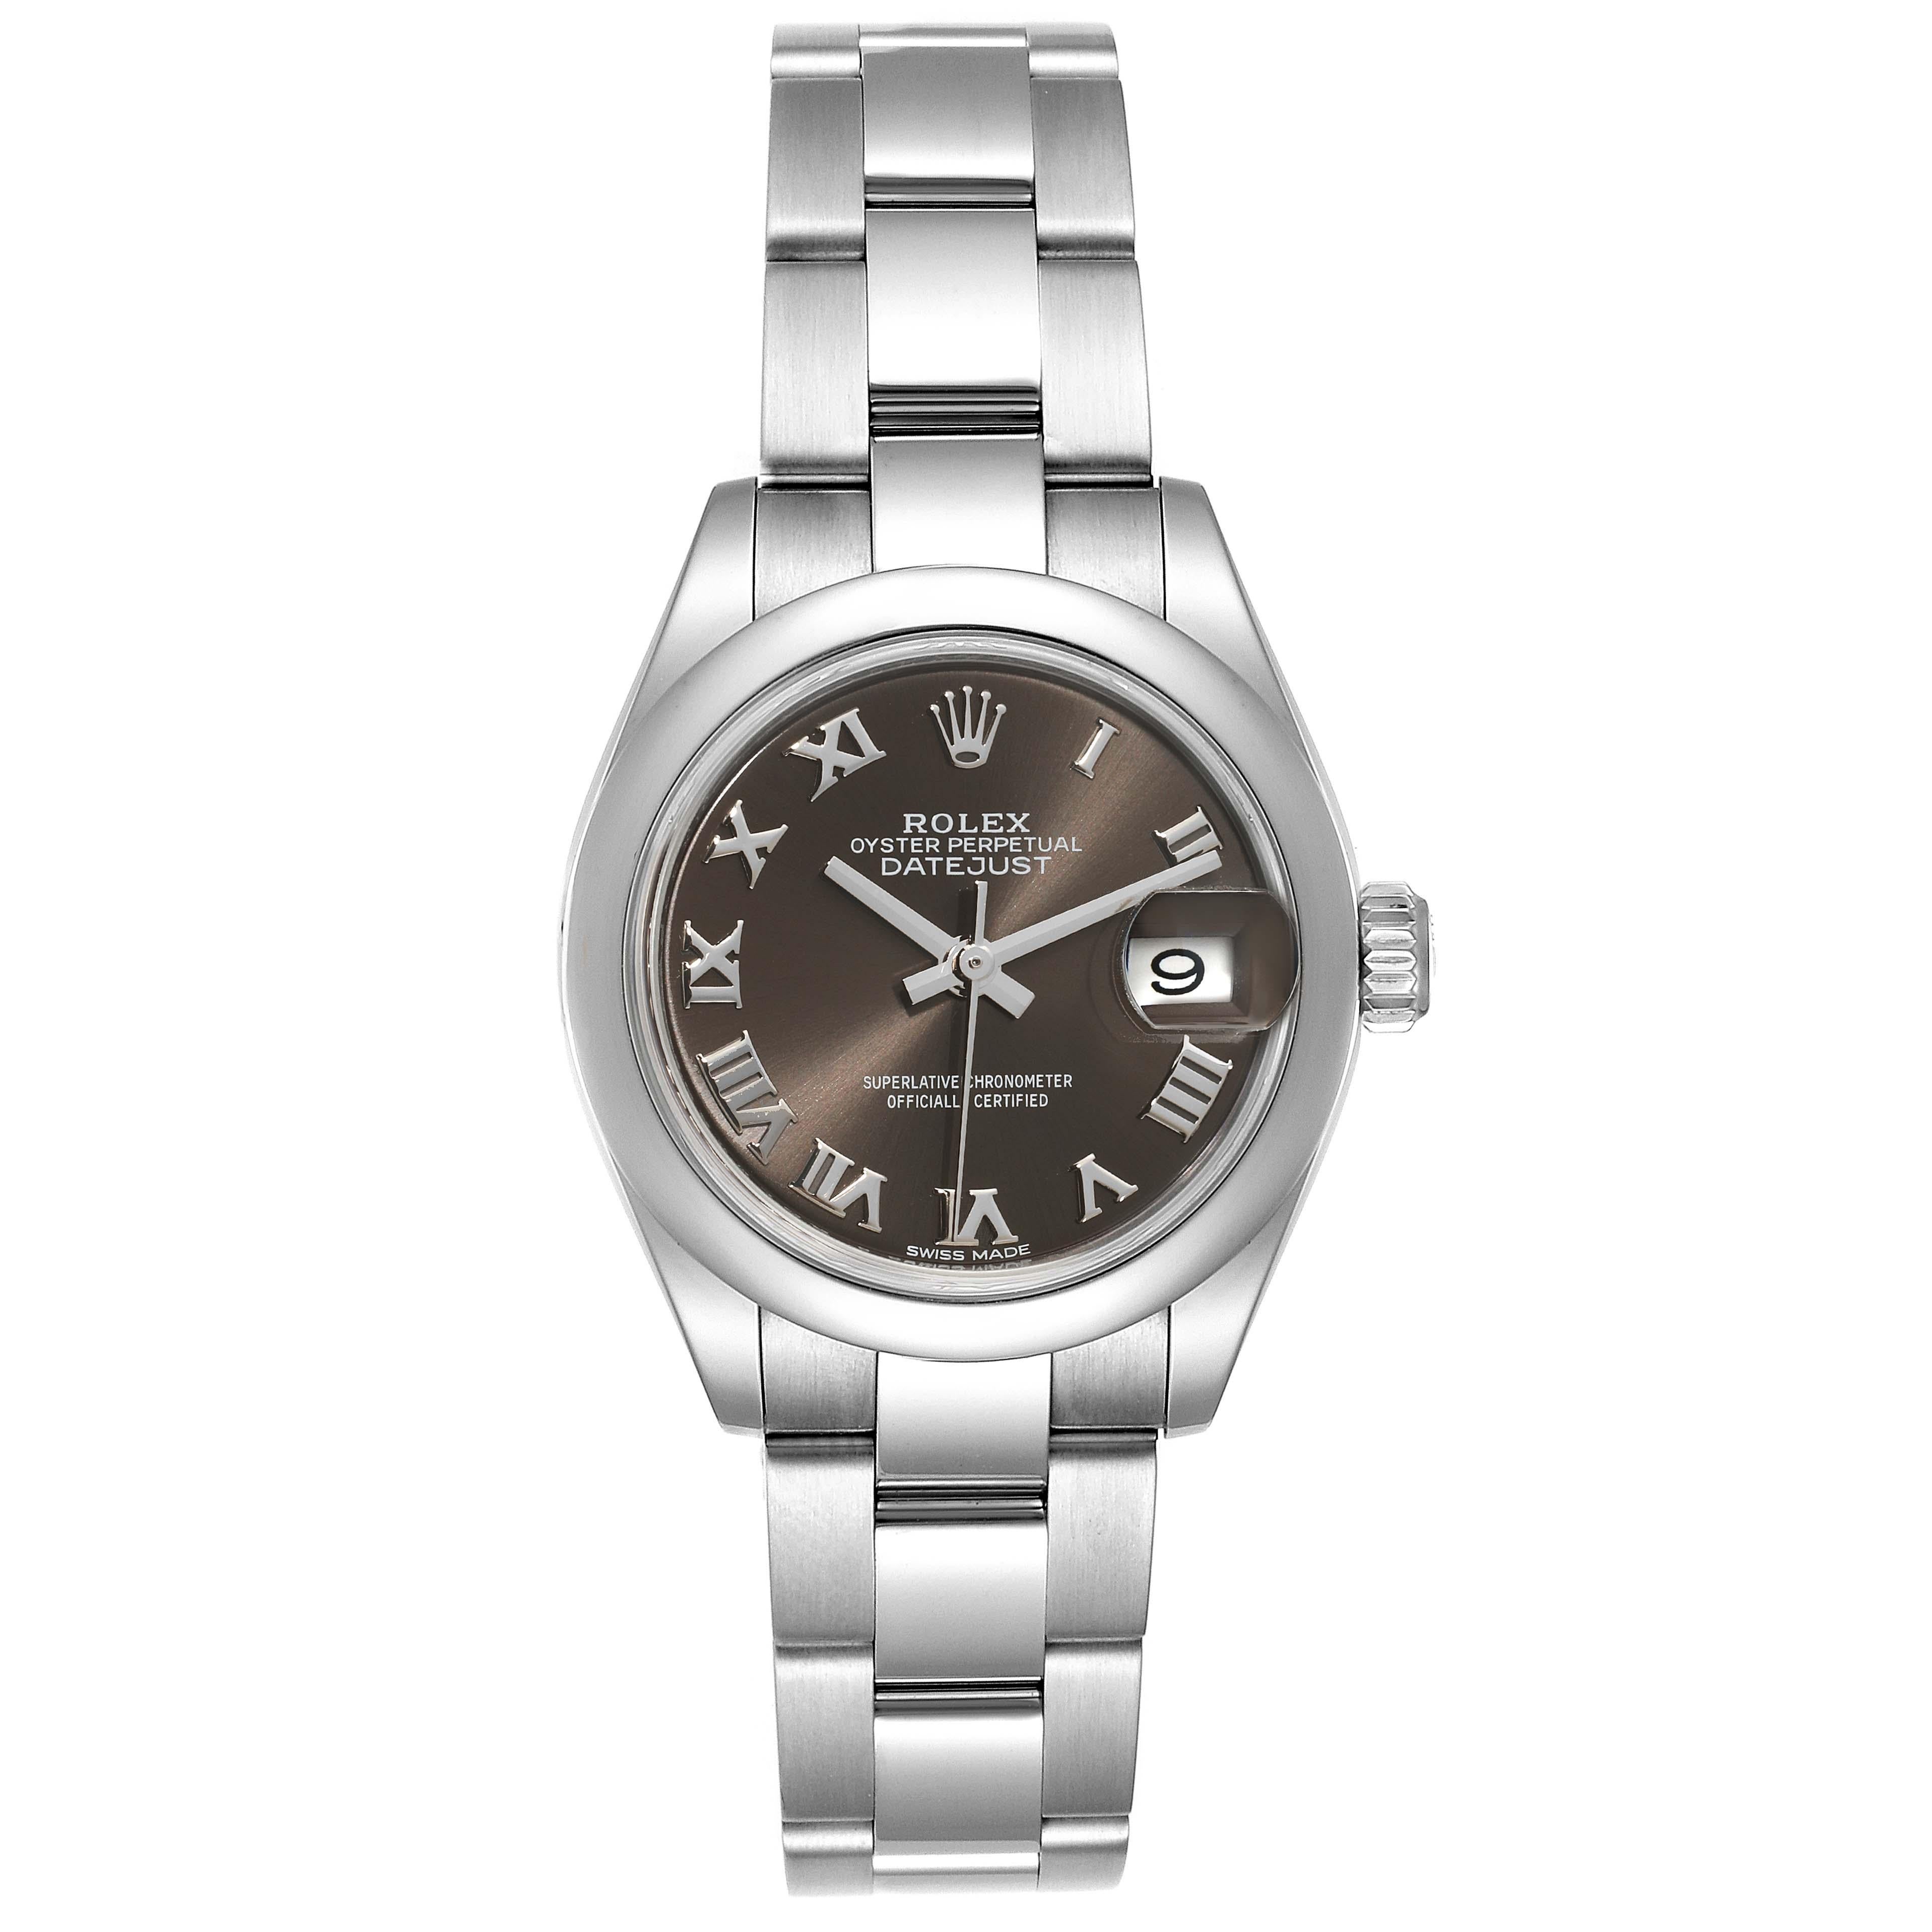 Rolex Datejust 28 Grey Dial Oyster Bracelet Steel Ladies Watch 279160. Officially certified chronometer self-winding movement. Stainless steel oyster case 28 mm in diameter. Rolex logo on a crown. Stainless steel smooth bezel. Scratch resistant